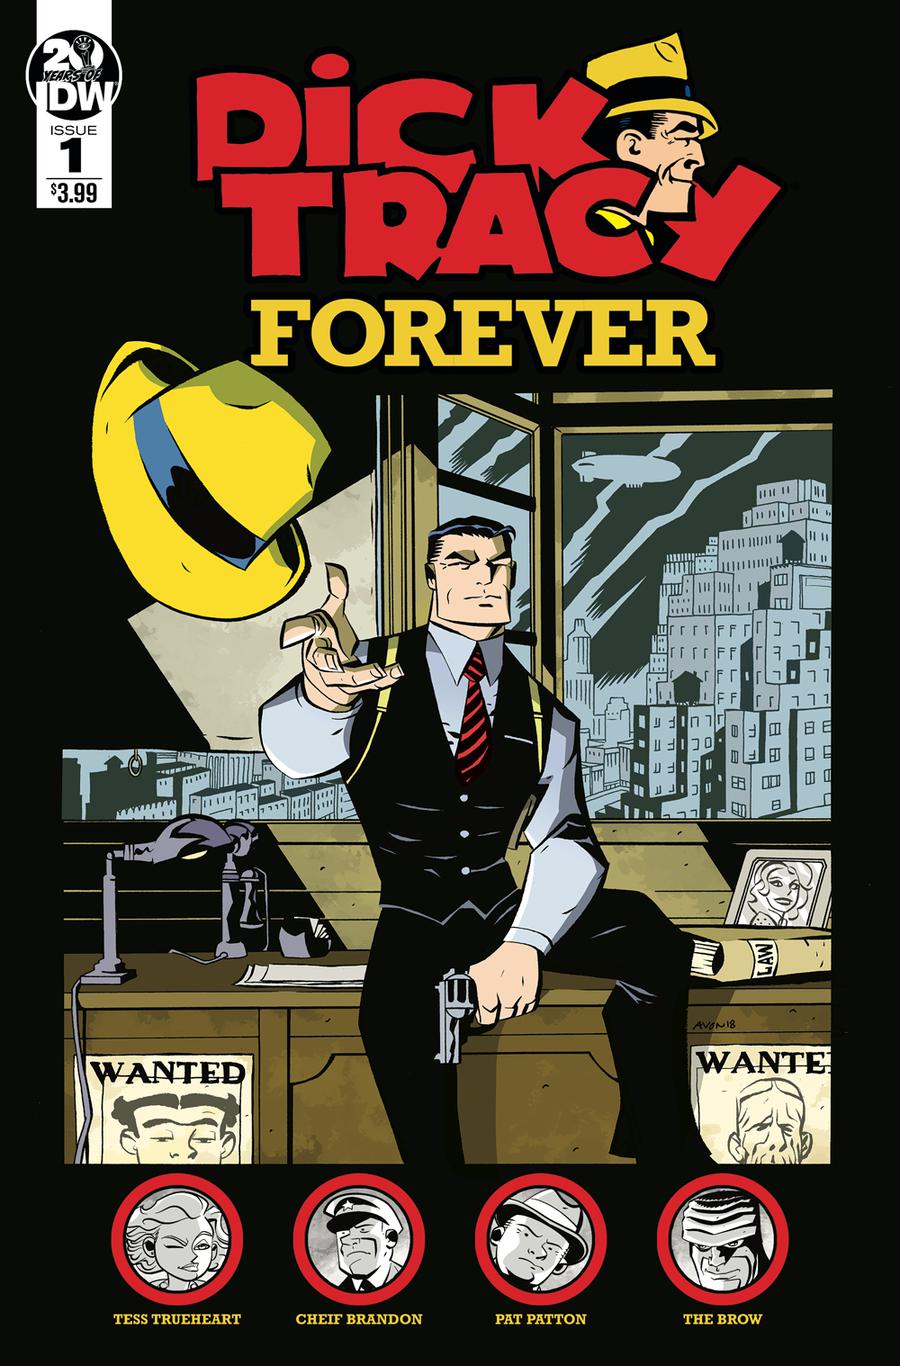 Dick Tracy Forever #1 Cover A Regular Michael Avon Oeming Cover